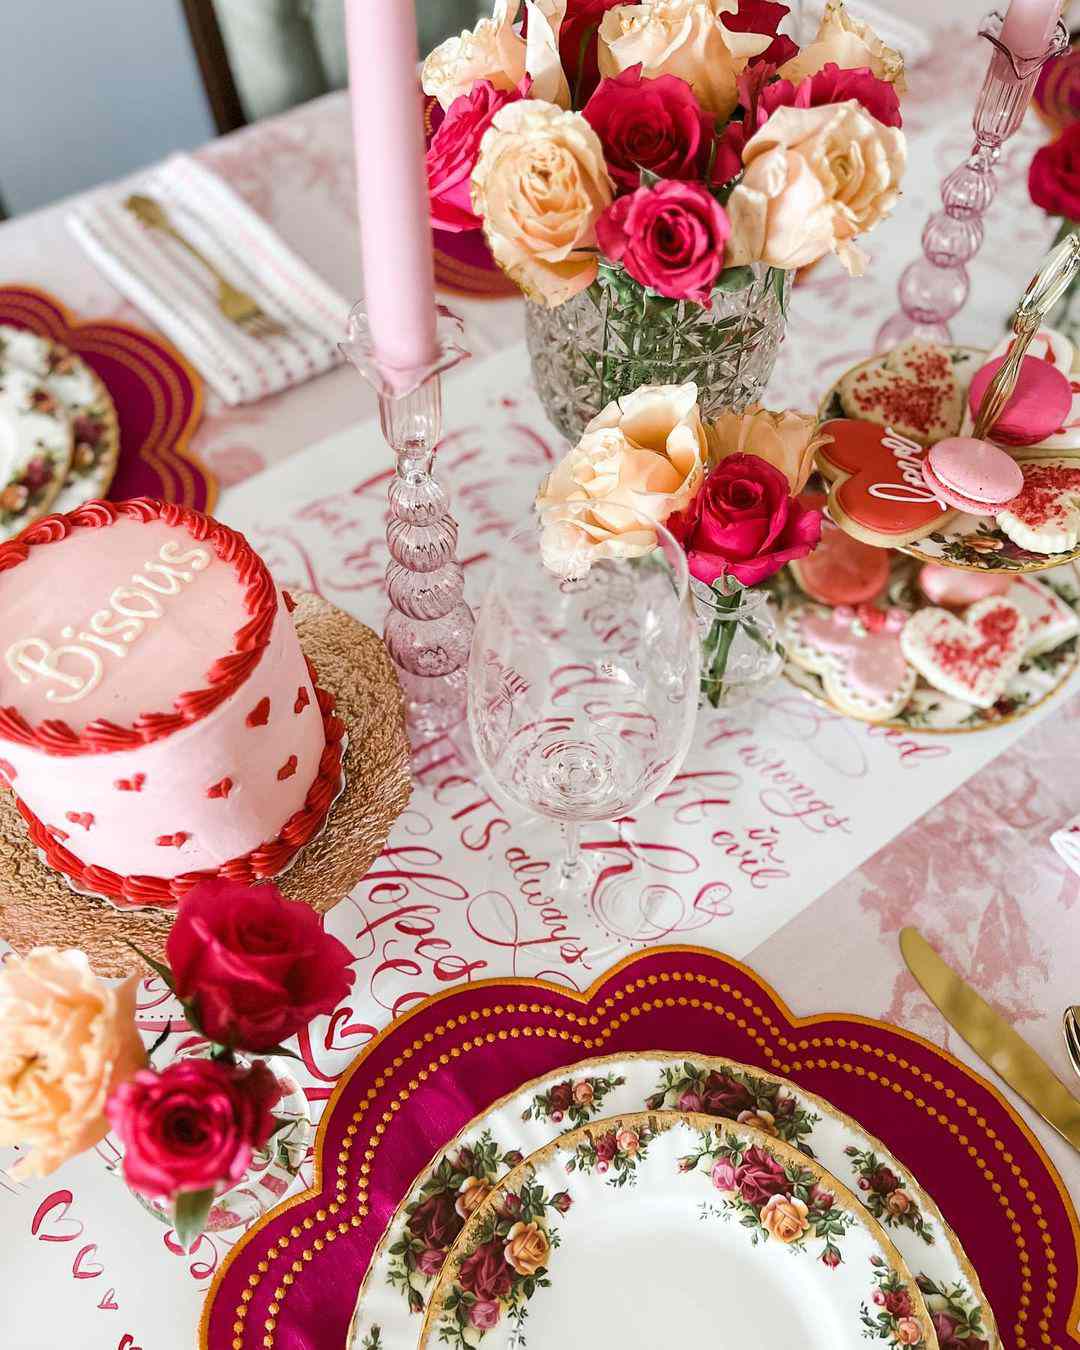 Gold and red roses on Valentine's Day table